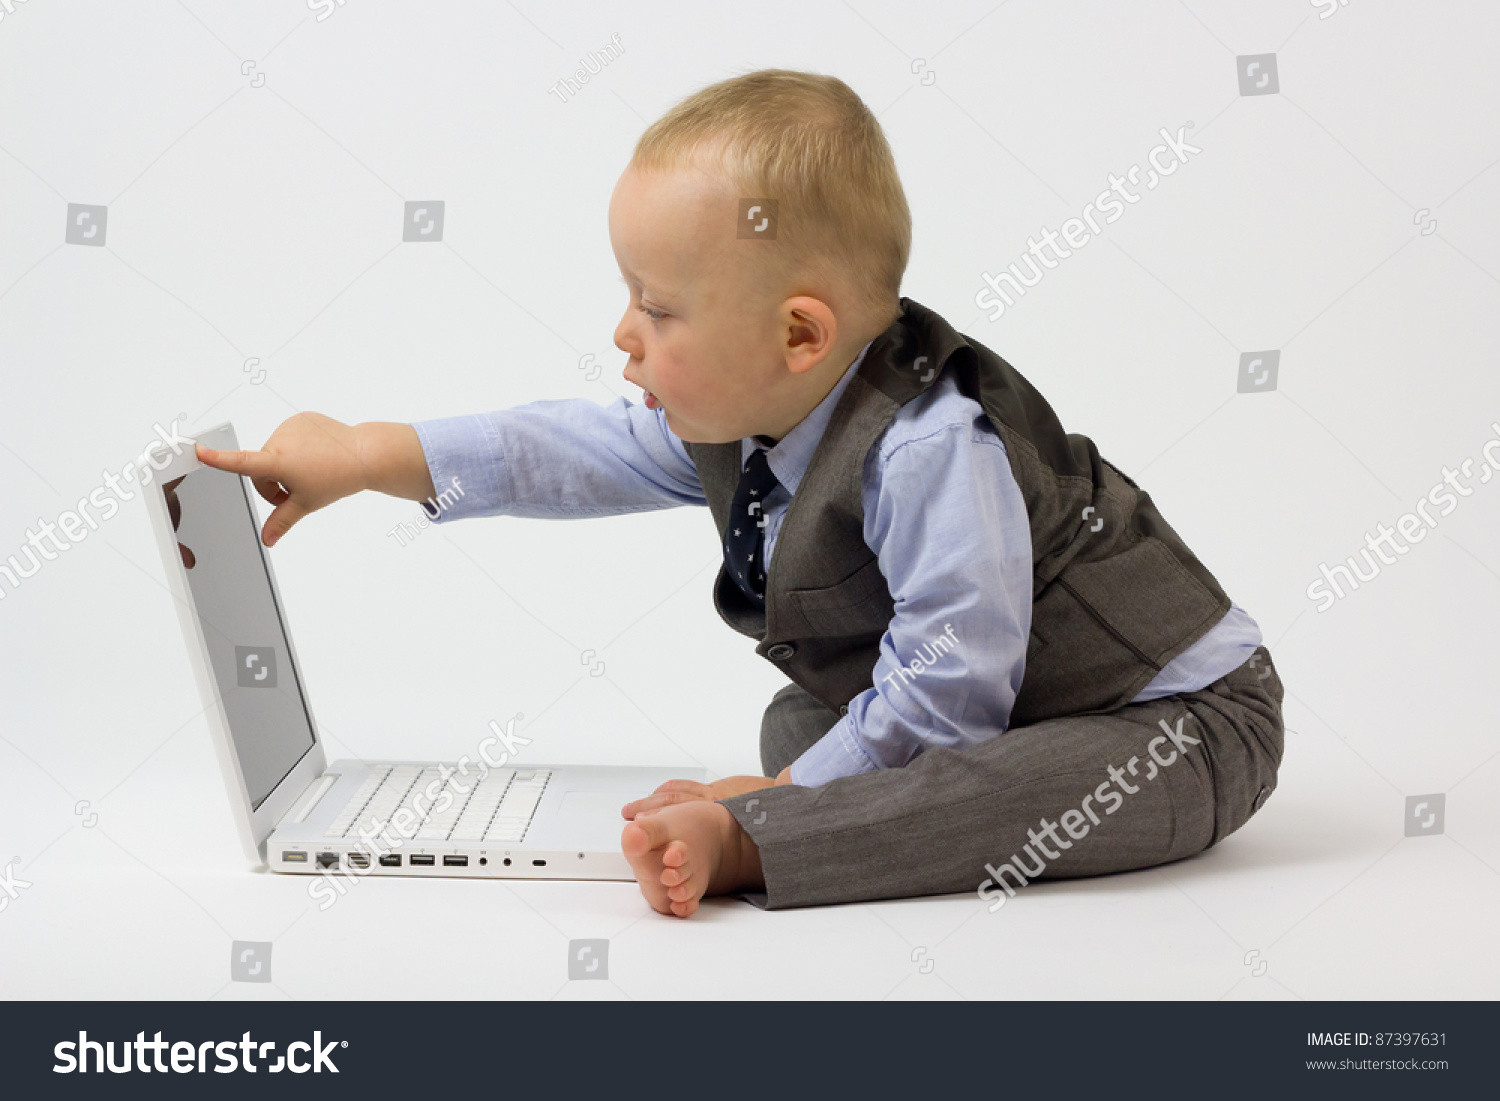 Work Work Fashion Baby
 A Cute Baby Boy Is Dressed In Smart Business Clothes And